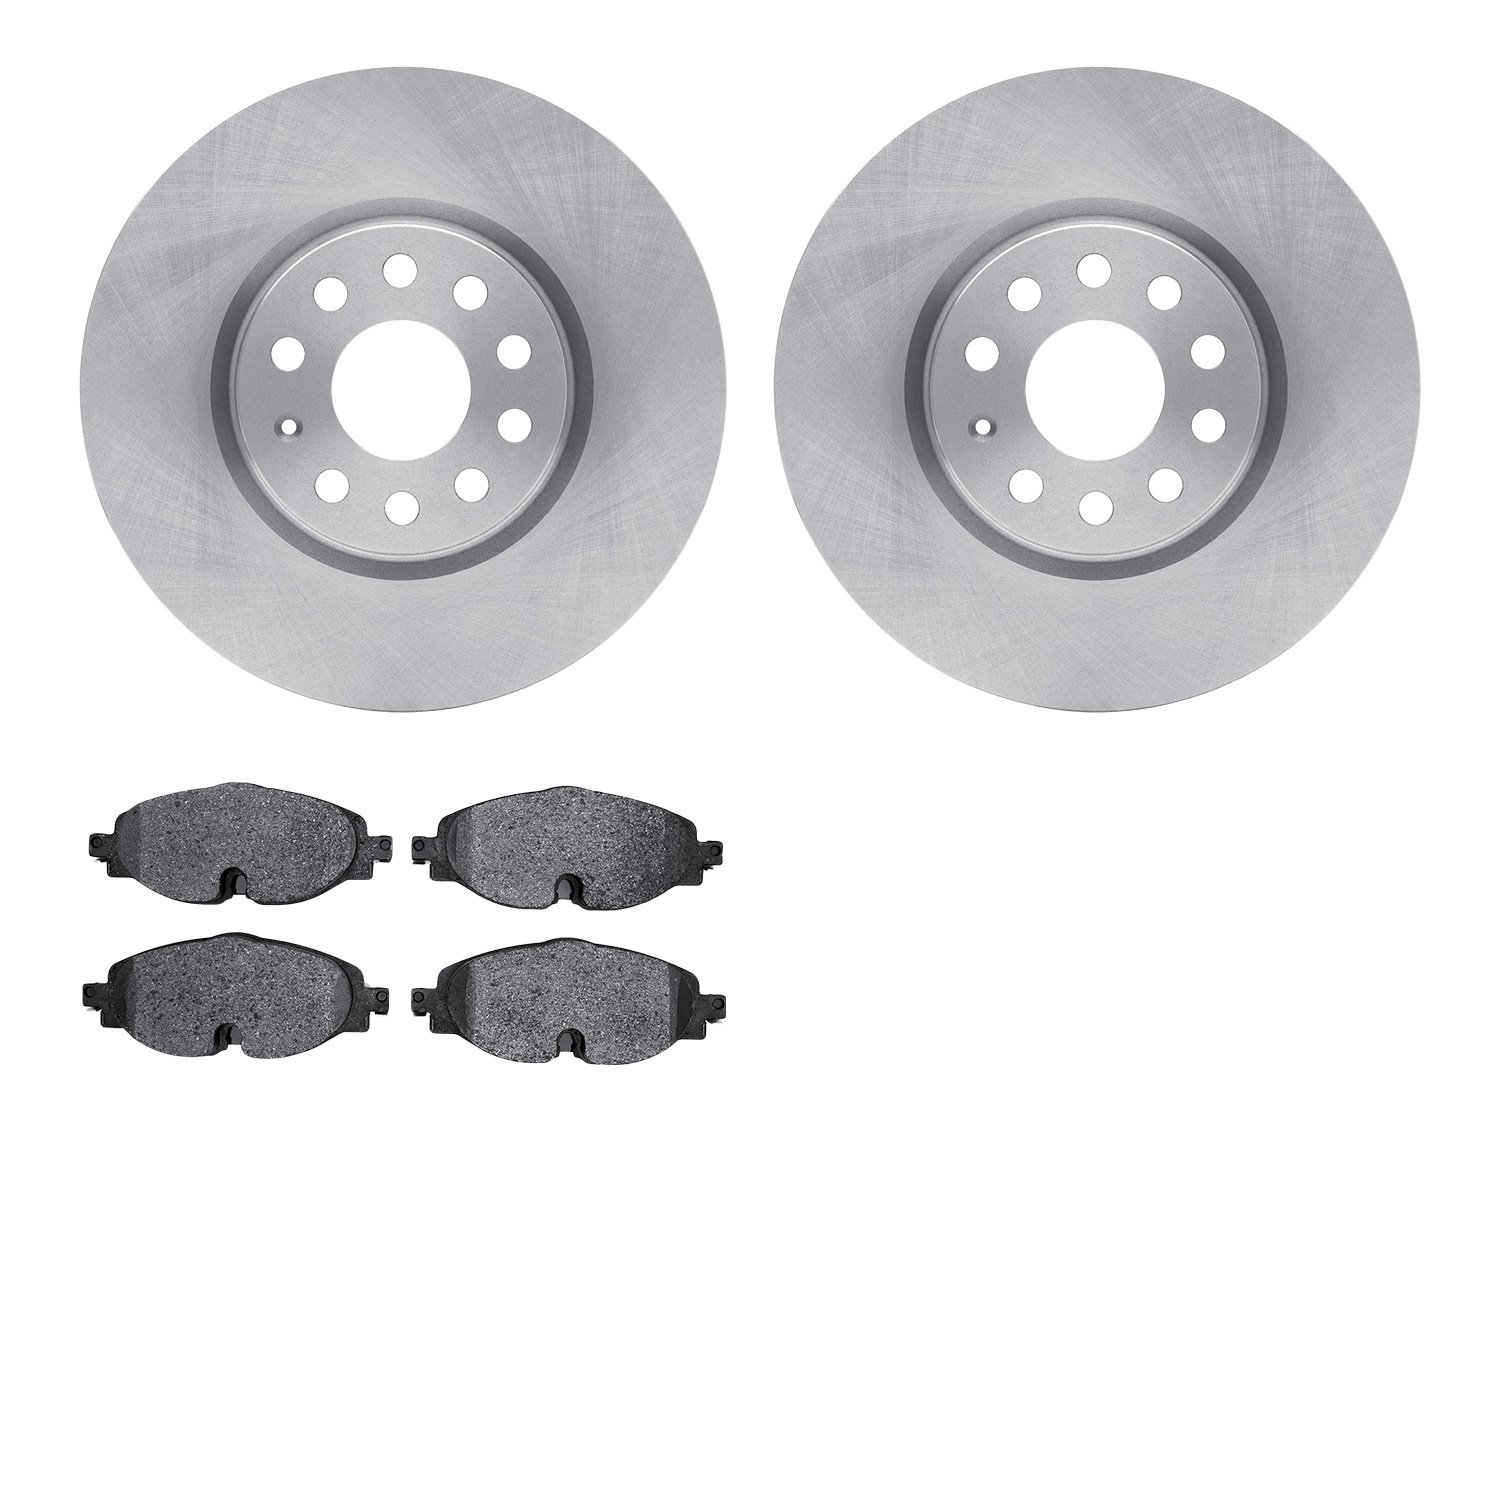 6302-74028 Brake Rotors with 3000-Series Ceramic Brake Pads Kit, Fits Select Multiple Makes/Models, Position: Front